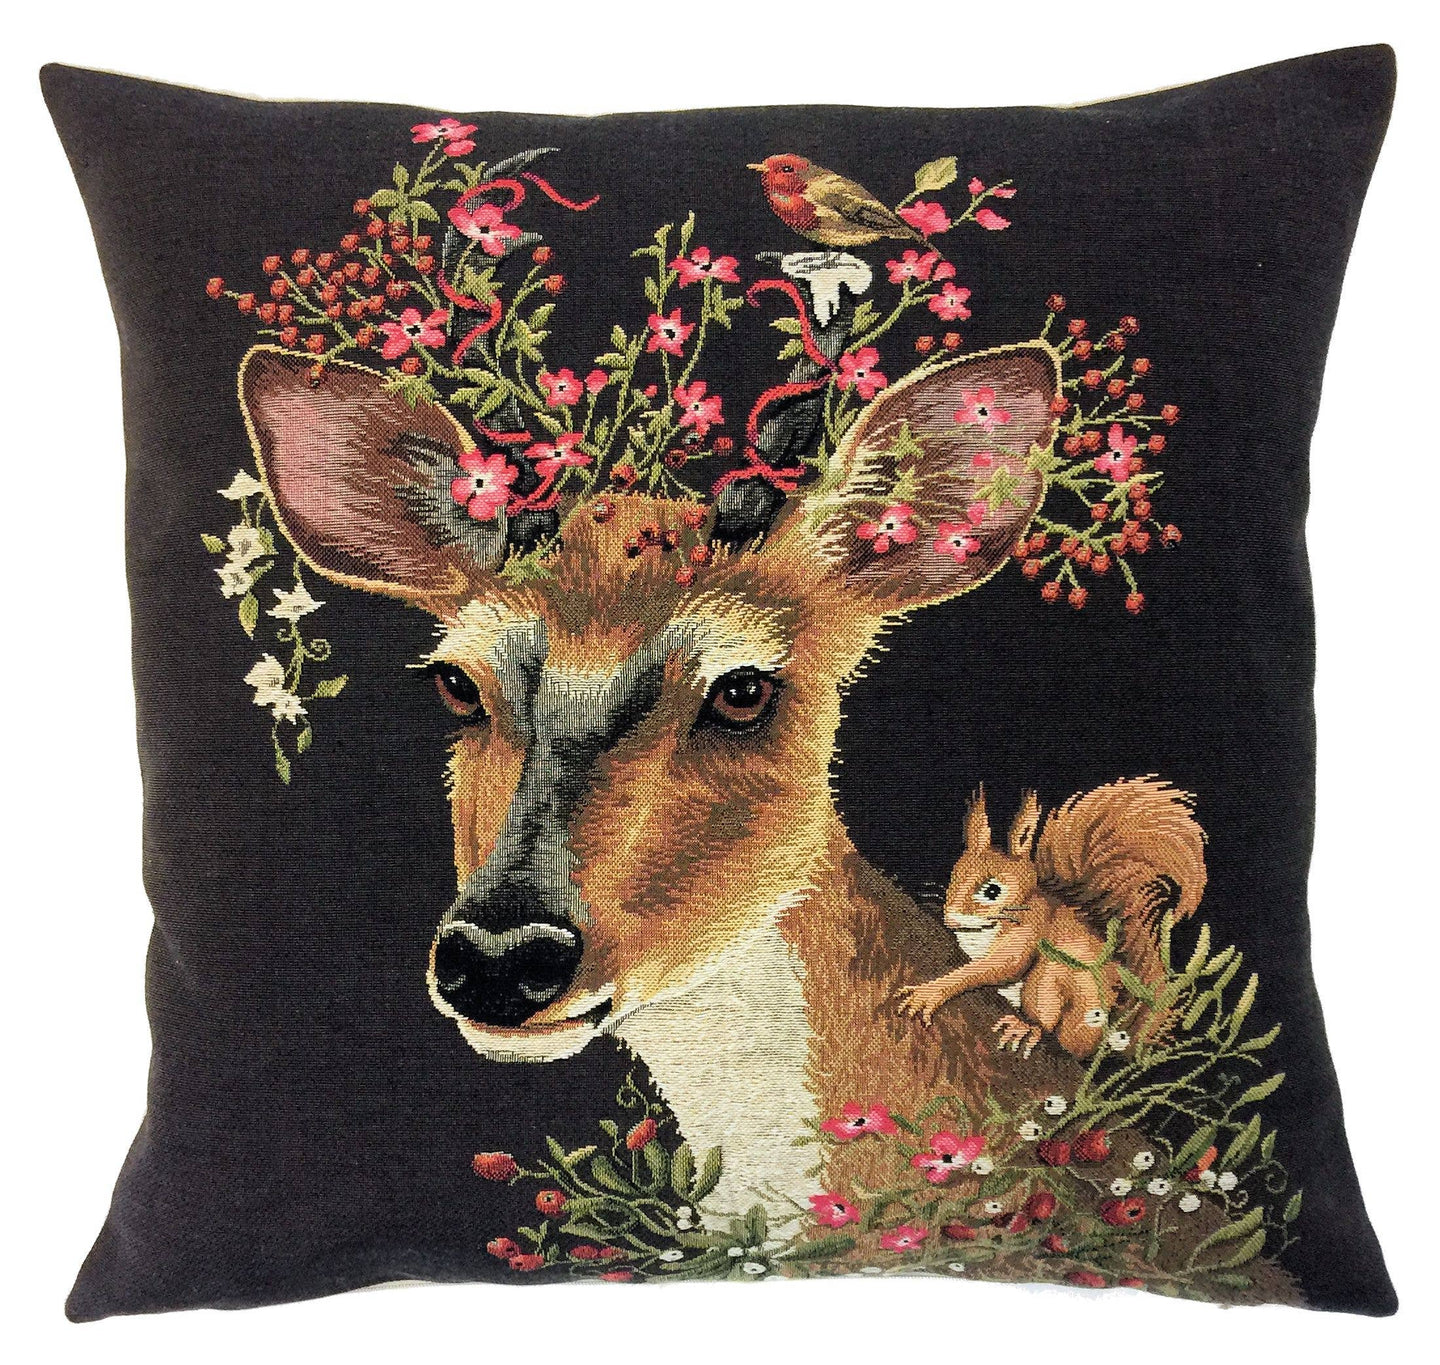 Decorative Pillow Cover - Deer with Chipmunk